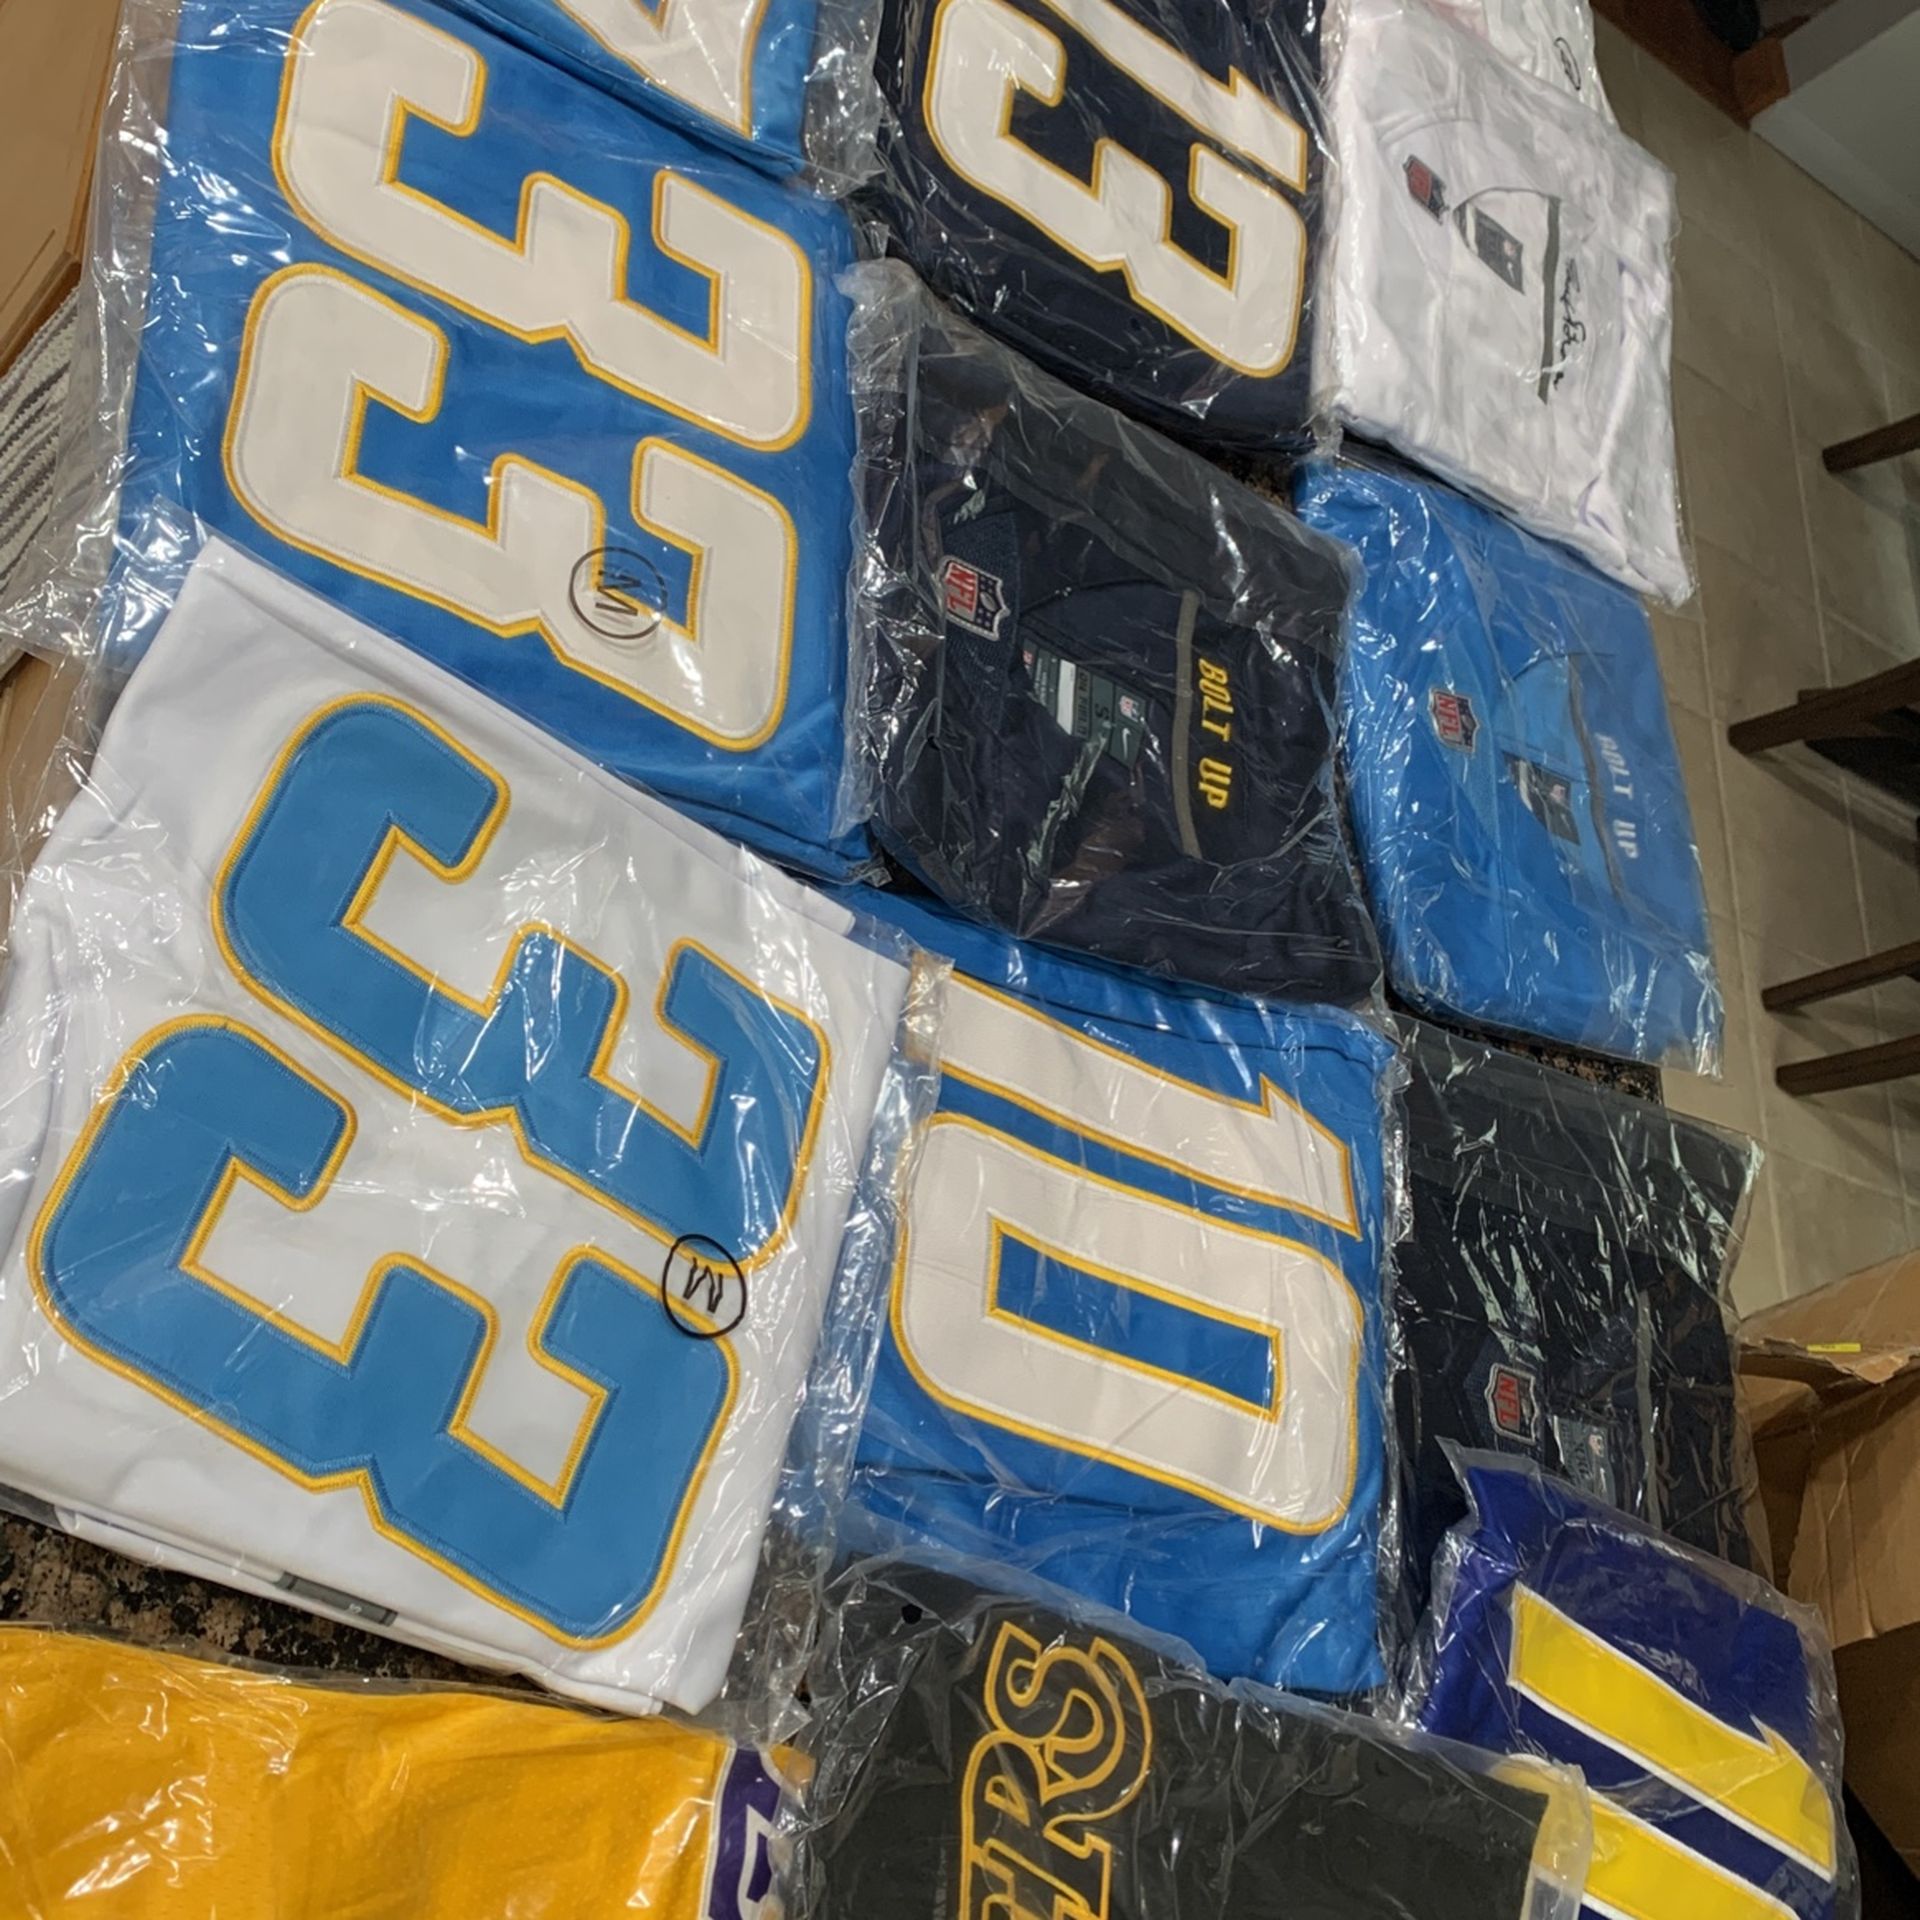 NFL FOOTBALL JERSEYS, BASEBALL JERSEYS , BASKETBALL JERSEYS 100% STITCHED AND EMBROIDERED ON FIELD JERSEYS  IN STOCK , CHARGERS JERSEYS , YOU NAME IT